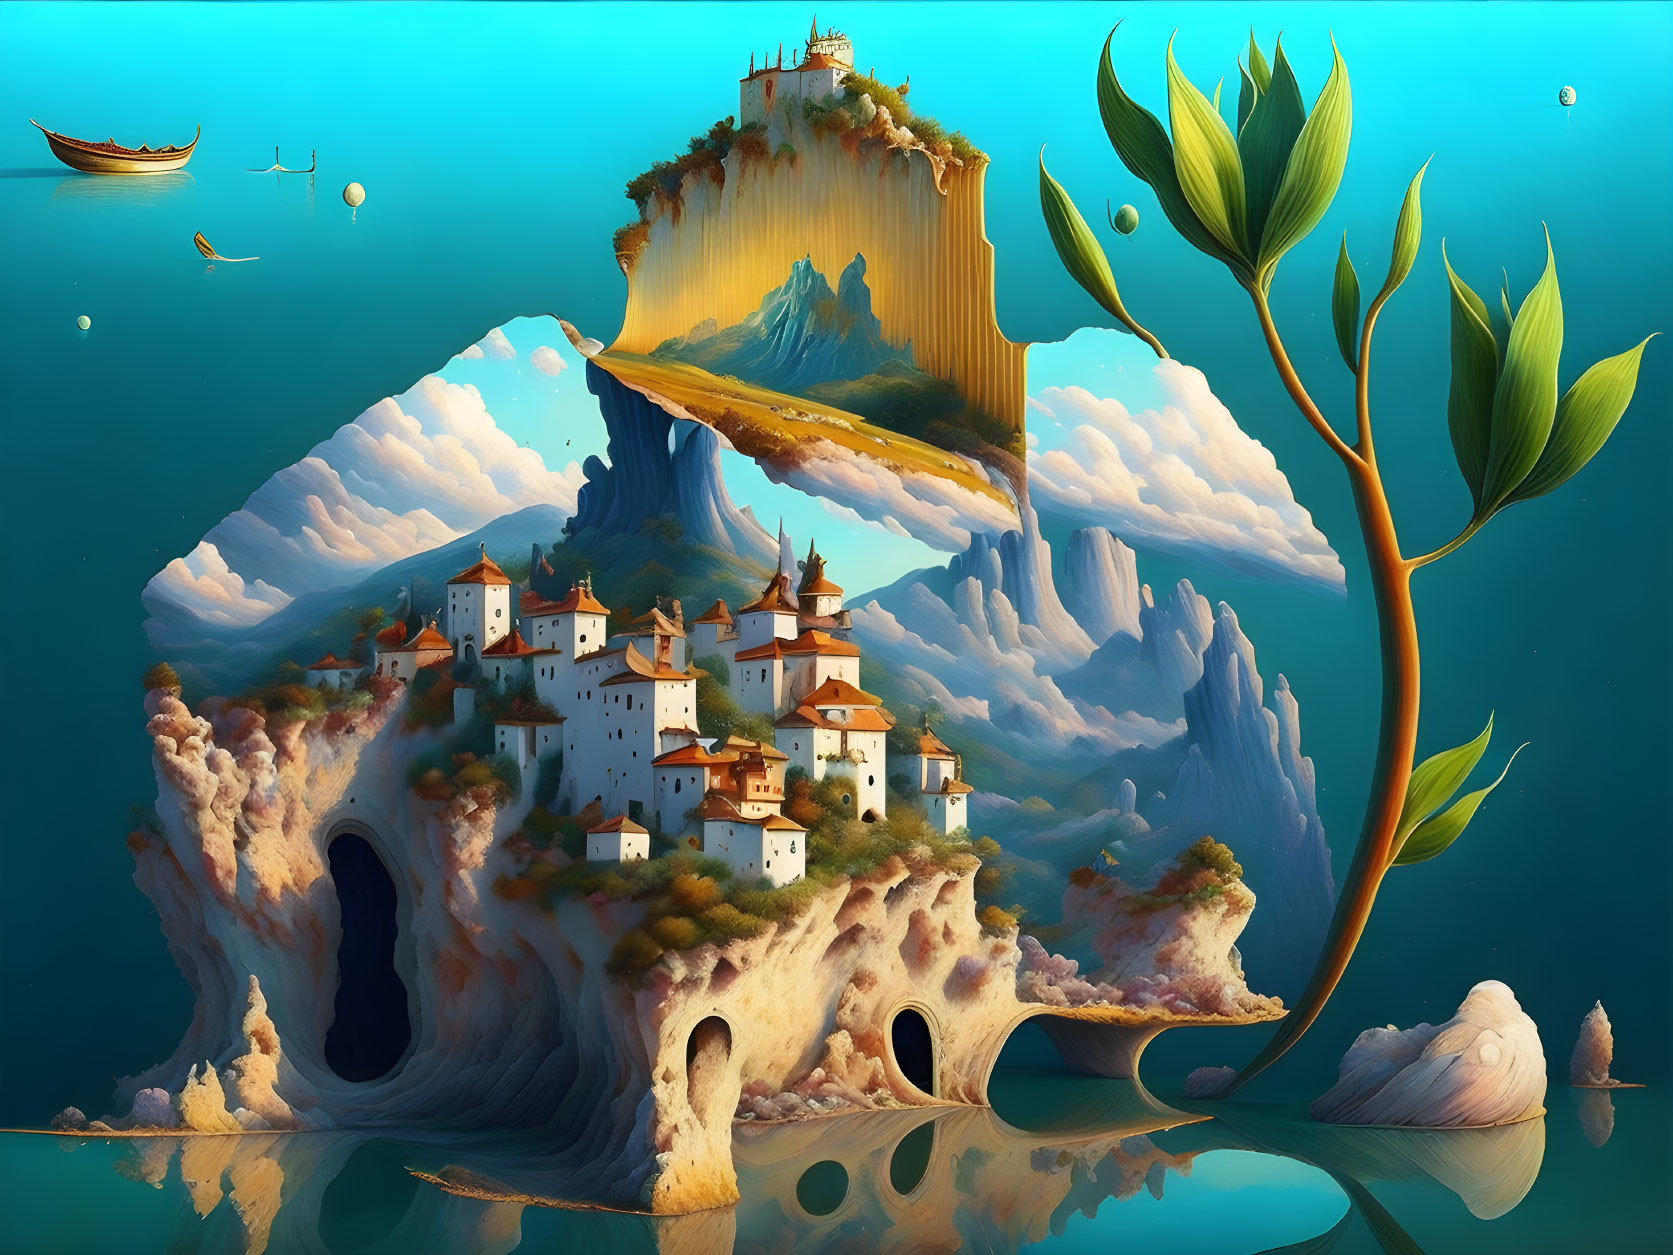 Fantastical seascape with cliff-top castle, floating islands, cavern houses, lush foliage, serene